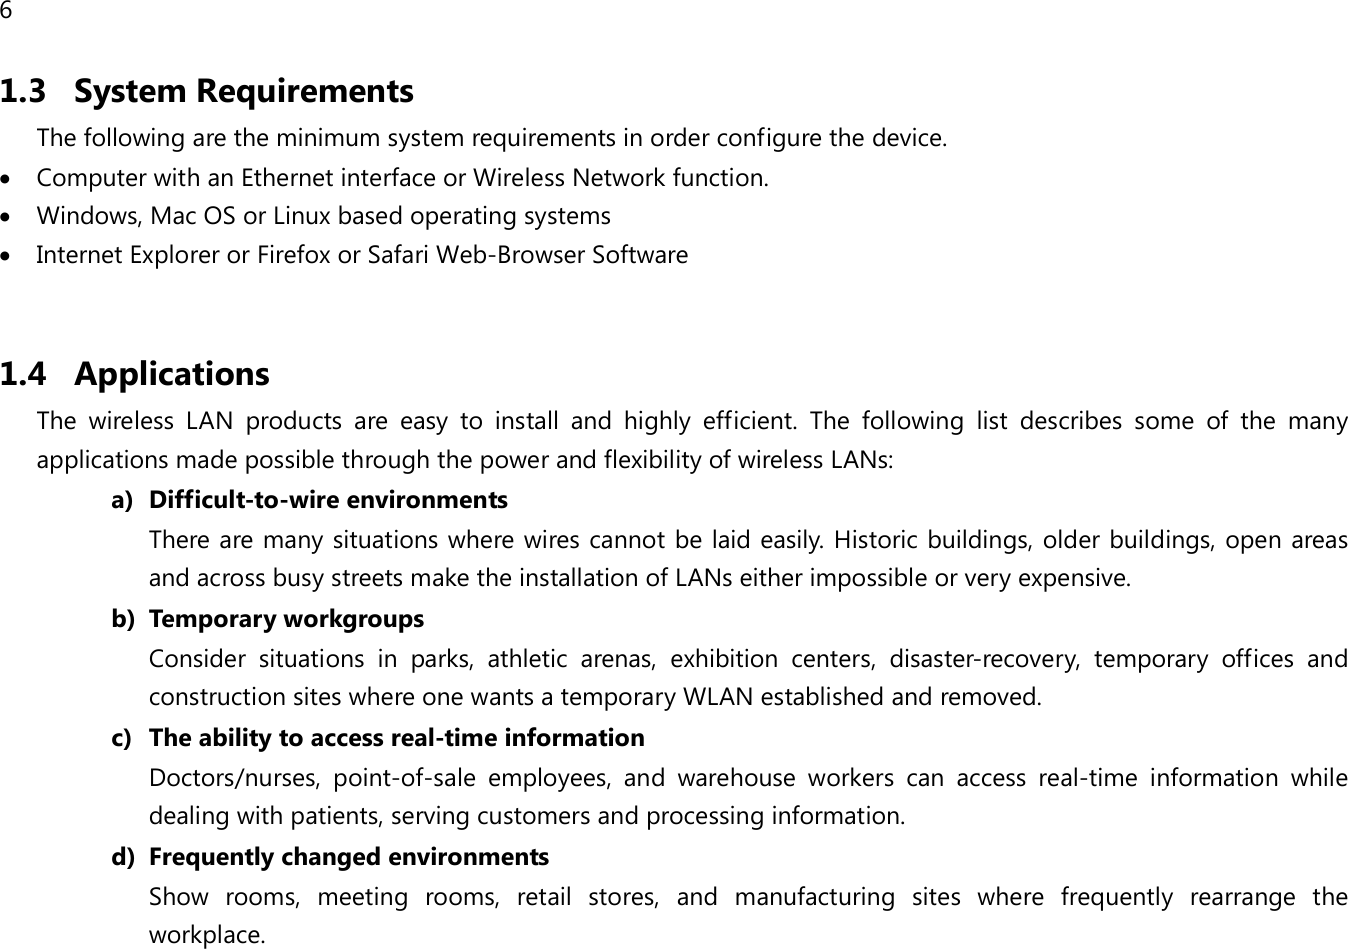 6  1.3 System Requirements The following are the minimum system requirements in order configure the device.  • Computer with an Ethernet interface or Wireless Network function. • Windows, Mac OS or Linux based operating systems • Internet Explorer or Firefox or Safari Web-Browser Software  1.4 Applications The wireless LAN products are easy to install and highly efficient. The following list describes some of the many applications made possible through the power and flexibility of wireless LANs: a) Difficult-to-wire environments There are many situations where wires cannot be laid easily. Historic buildings, older buildings, open areas and across busy streets make the installation of LANs either impossible or very expensive. b) Temporary workgroups Consider situations in parks, athletic arenas, exhibition centers, disaster-recovery, temporary offices and construction sites where one wants a temporary WLAN established and removed. c) The ability to access real-time information Doctors/nurses, point-of-sale employees, and warehouse workers can access real-time information while dealing with patients, serving customers and processing information. d) Frequently changed environments Show rooms, meeting rooms, retail stores, and manufacturing sites where frequently rearrange the workplace.   